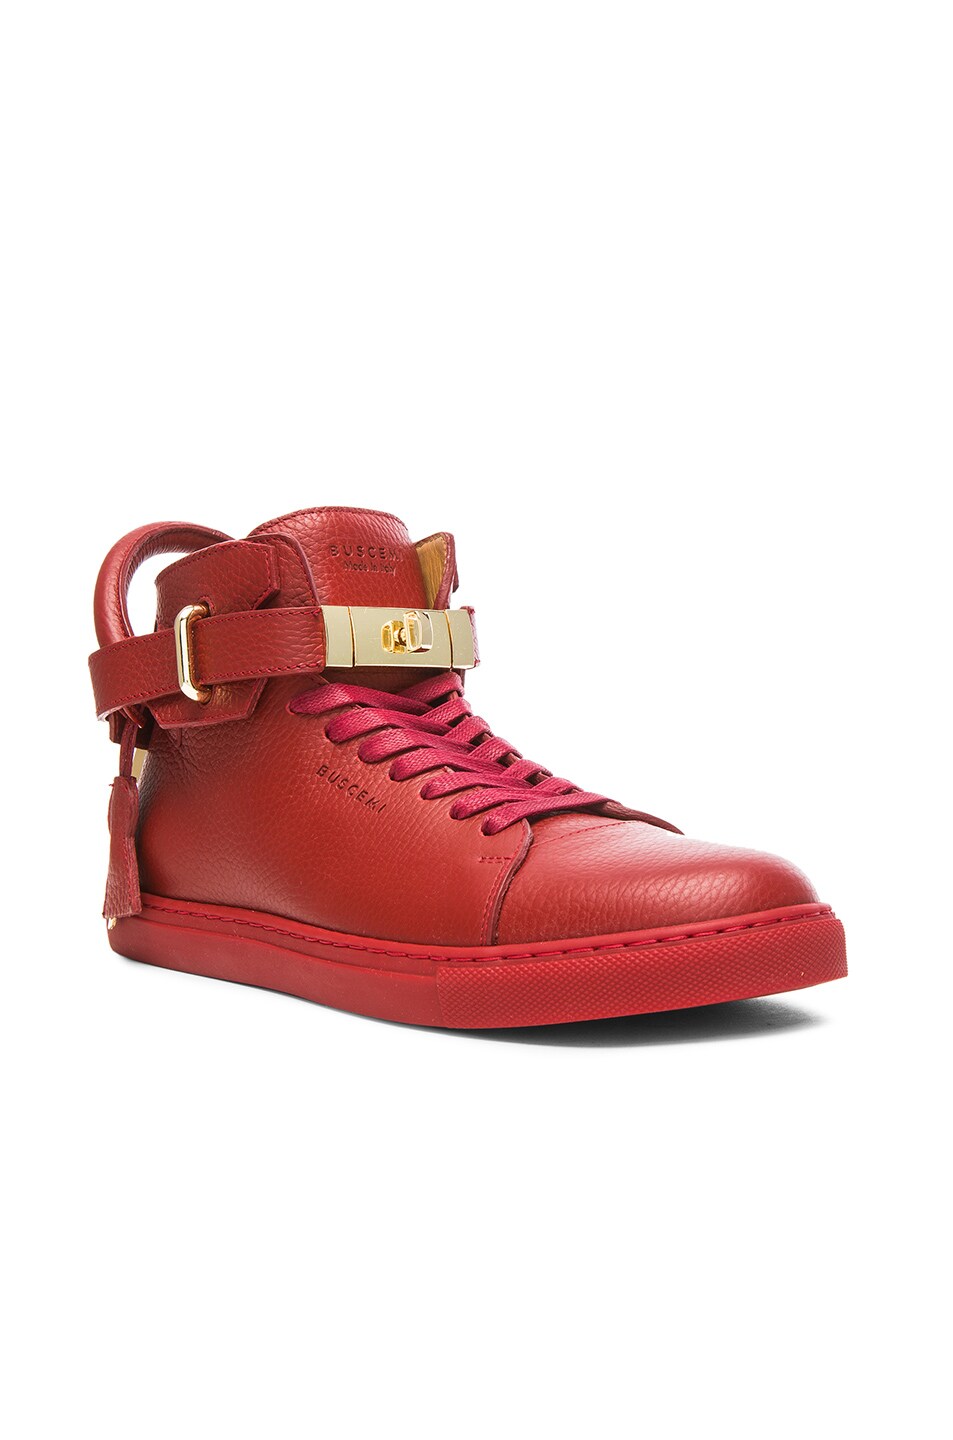 Image 1 of Buscemi 100 MM High Top Leather Sneakers in Guts